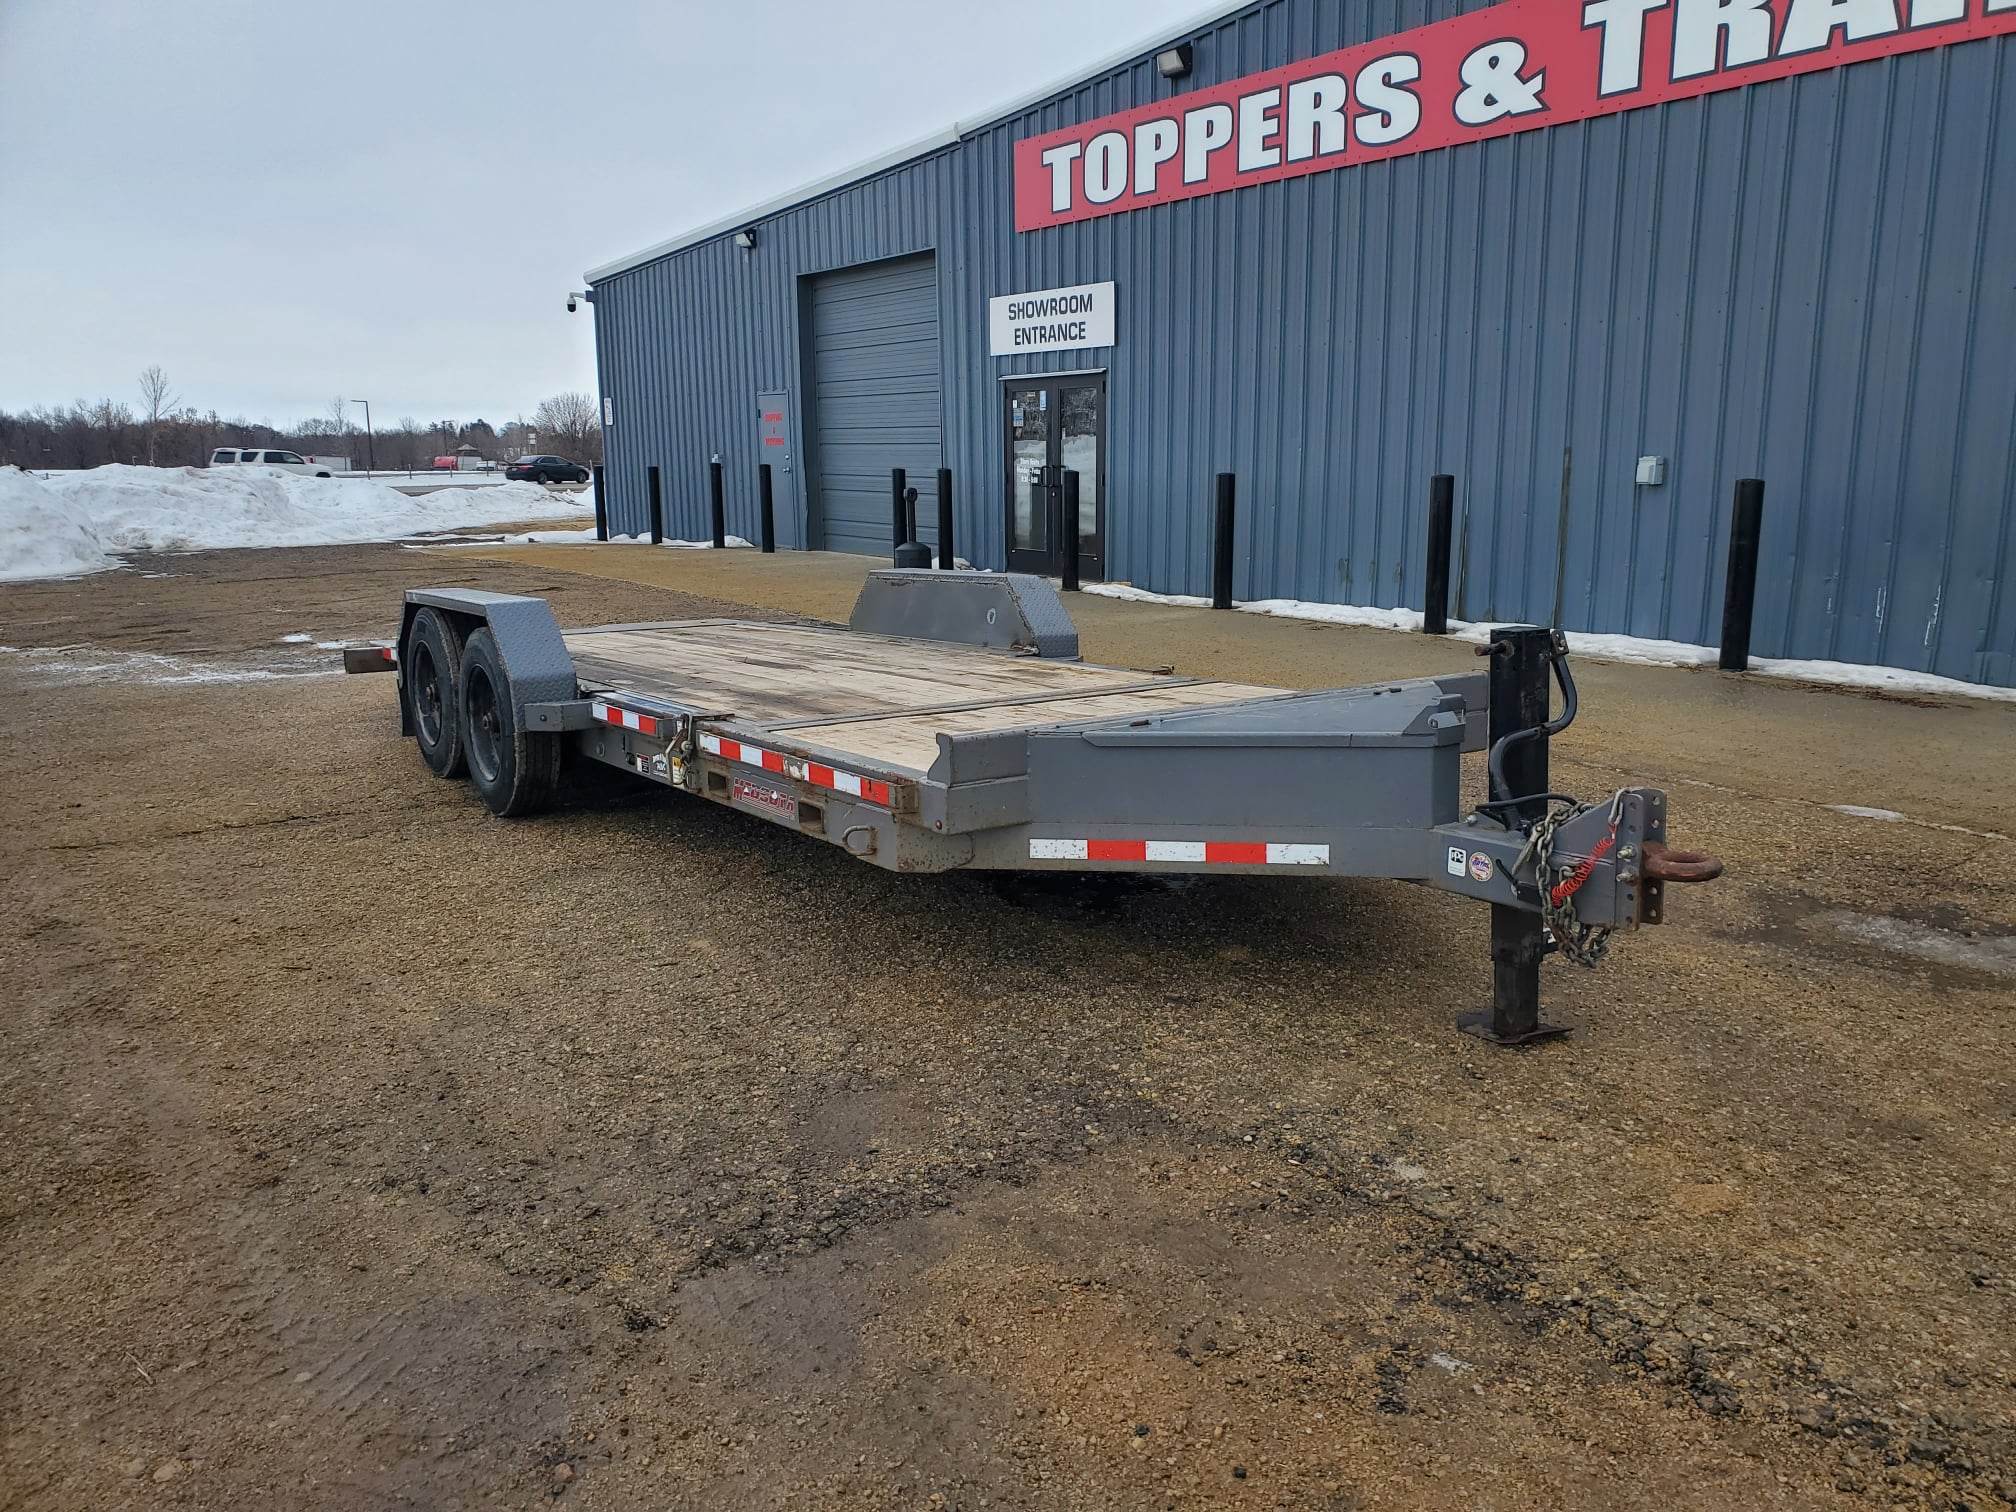 MIDSOTA TB-20 RENTAL TRAILER | Toppers and Trailers Plus